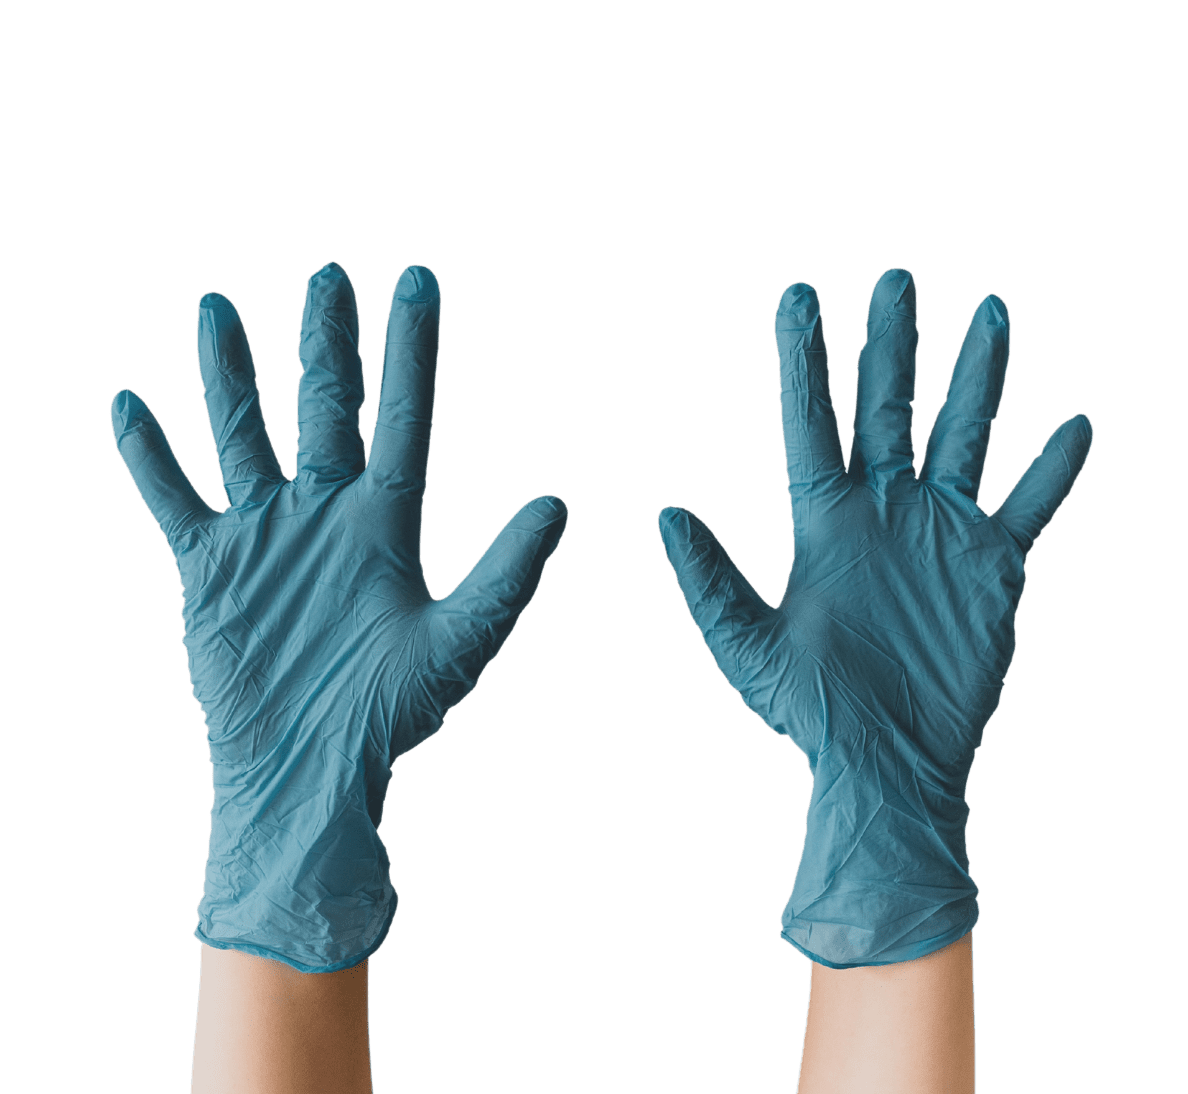 2 hands with rubber gloves